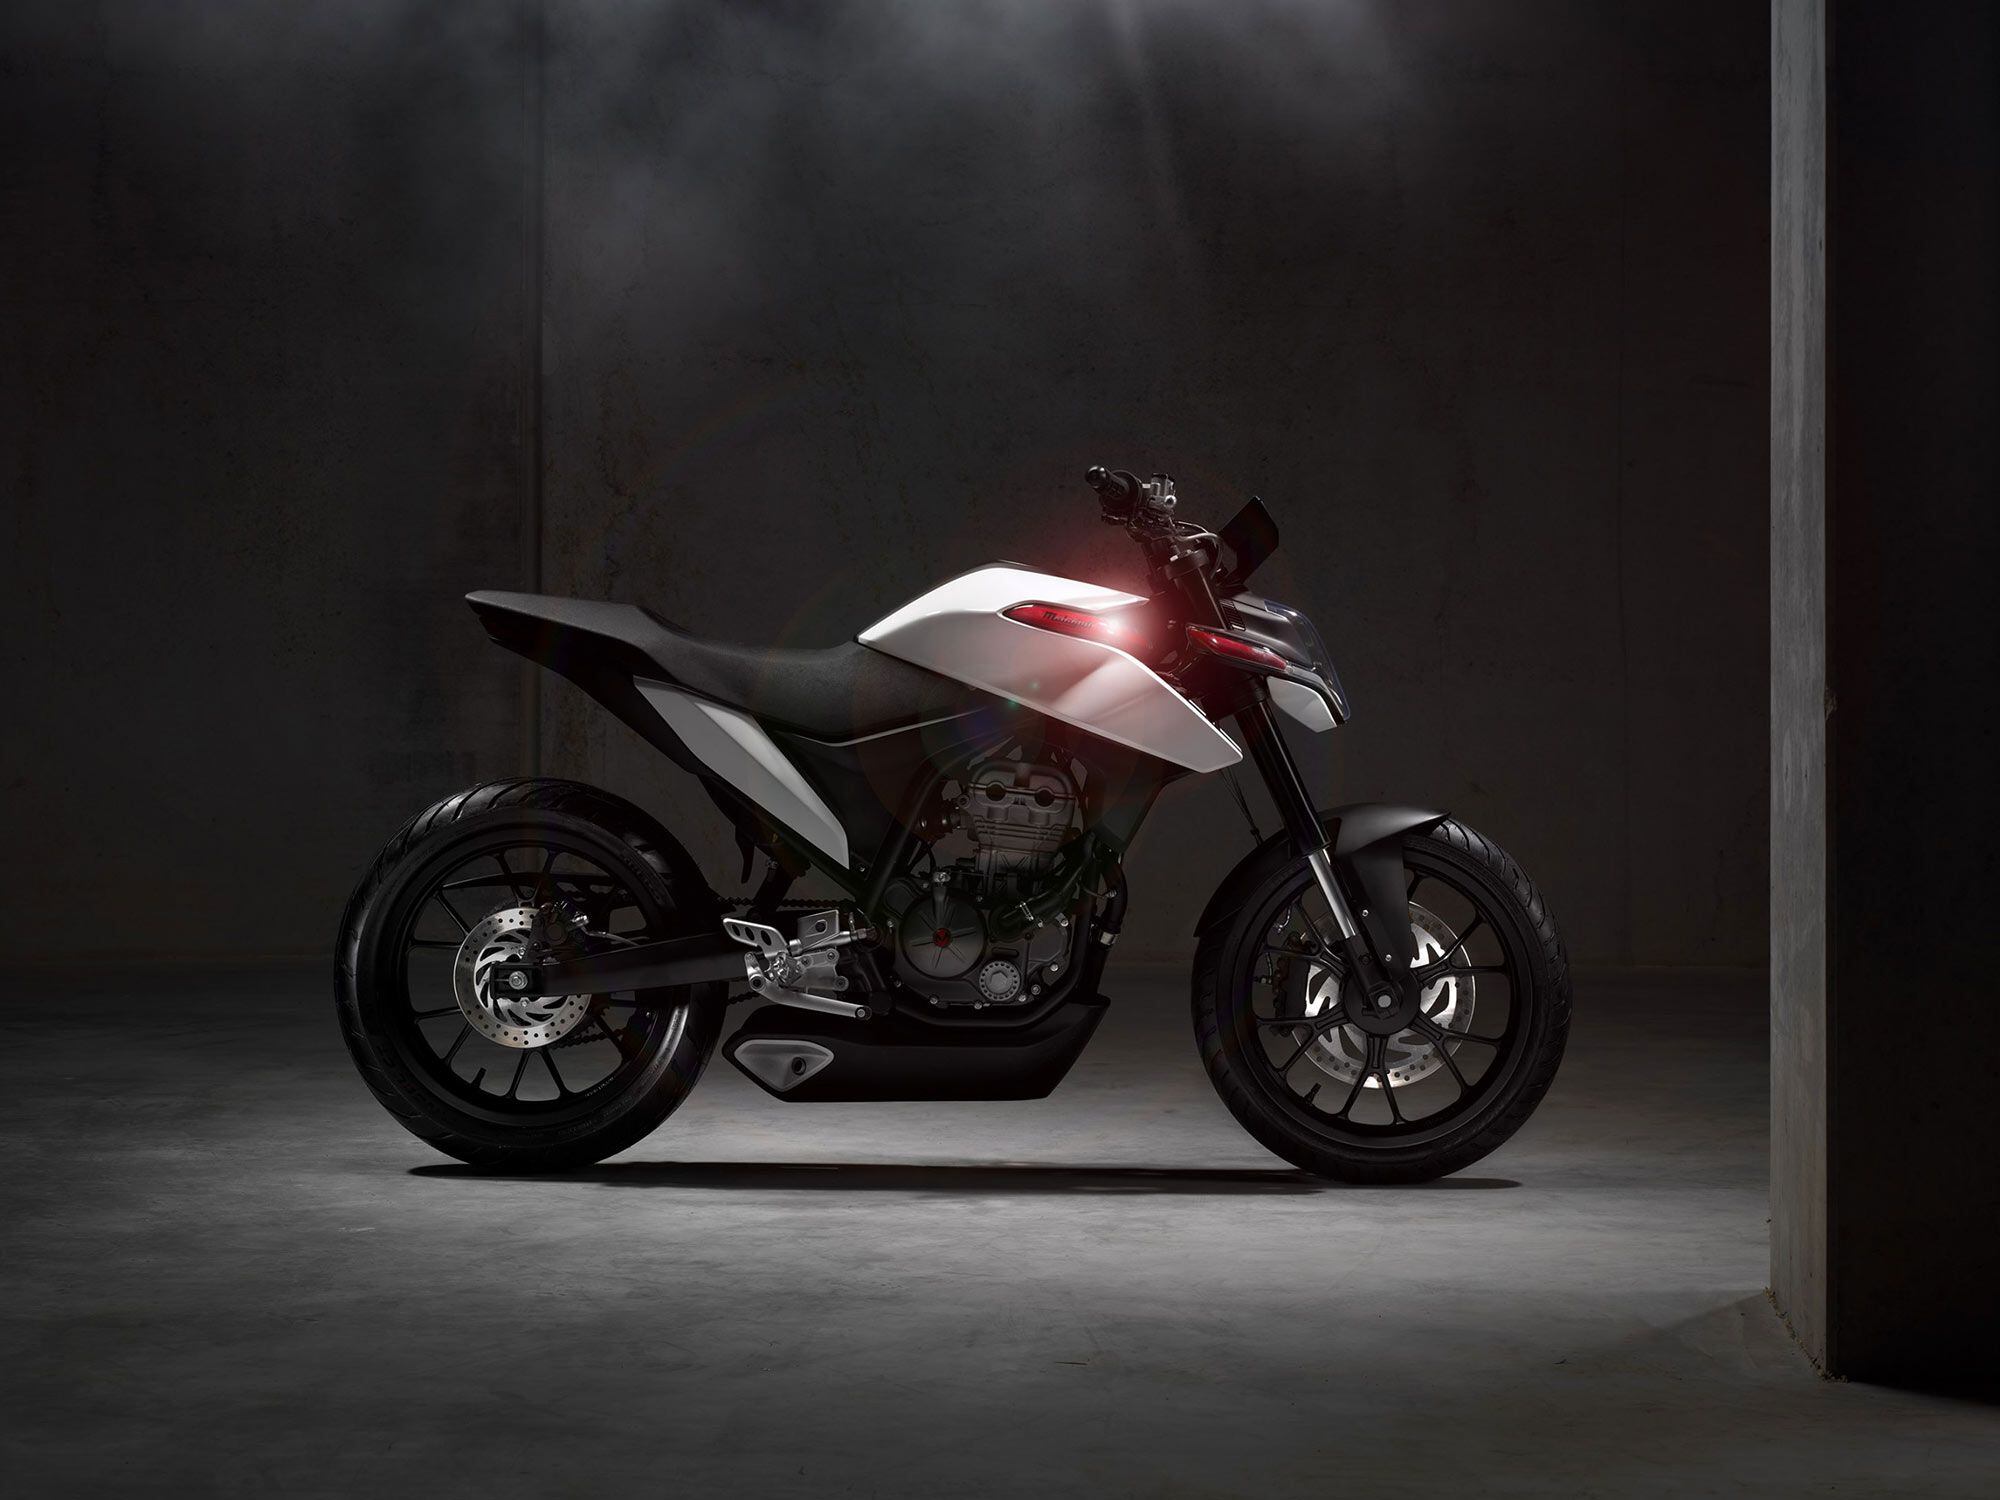 Malaguti’s Drakon 125 was first shown back in 2019 and is believed to be near-production ready.